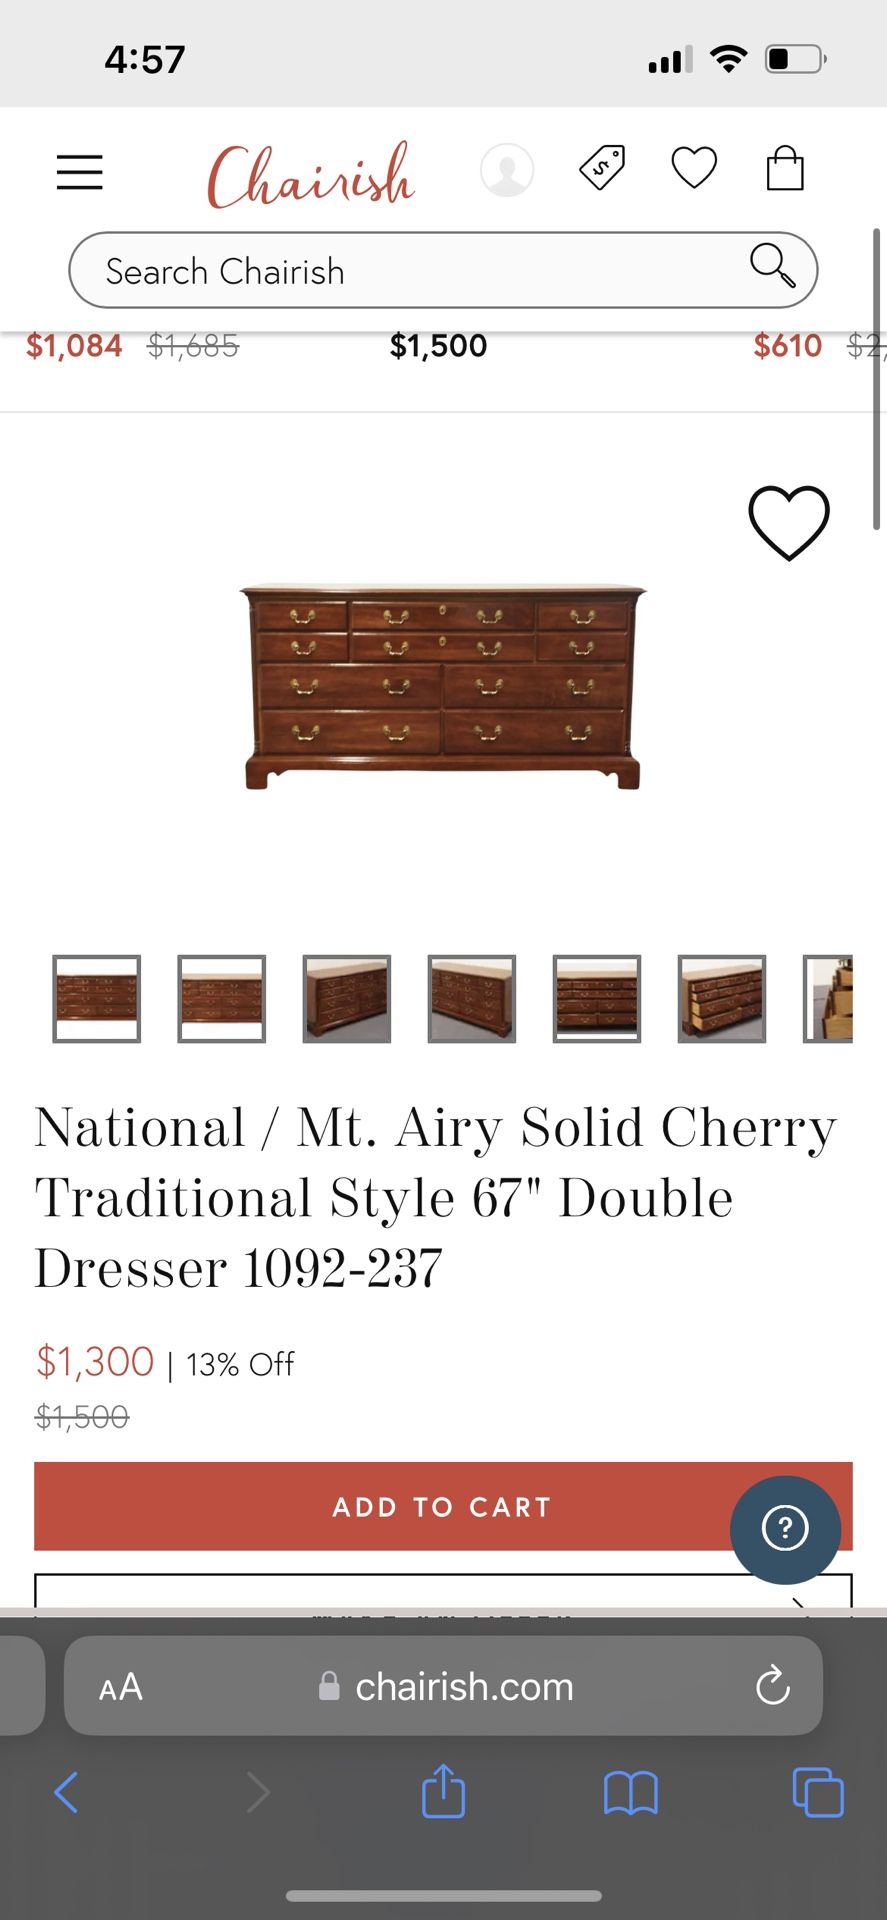 National / Mt. Airy Solid Cherry Traditional Style 66" Double Dresser